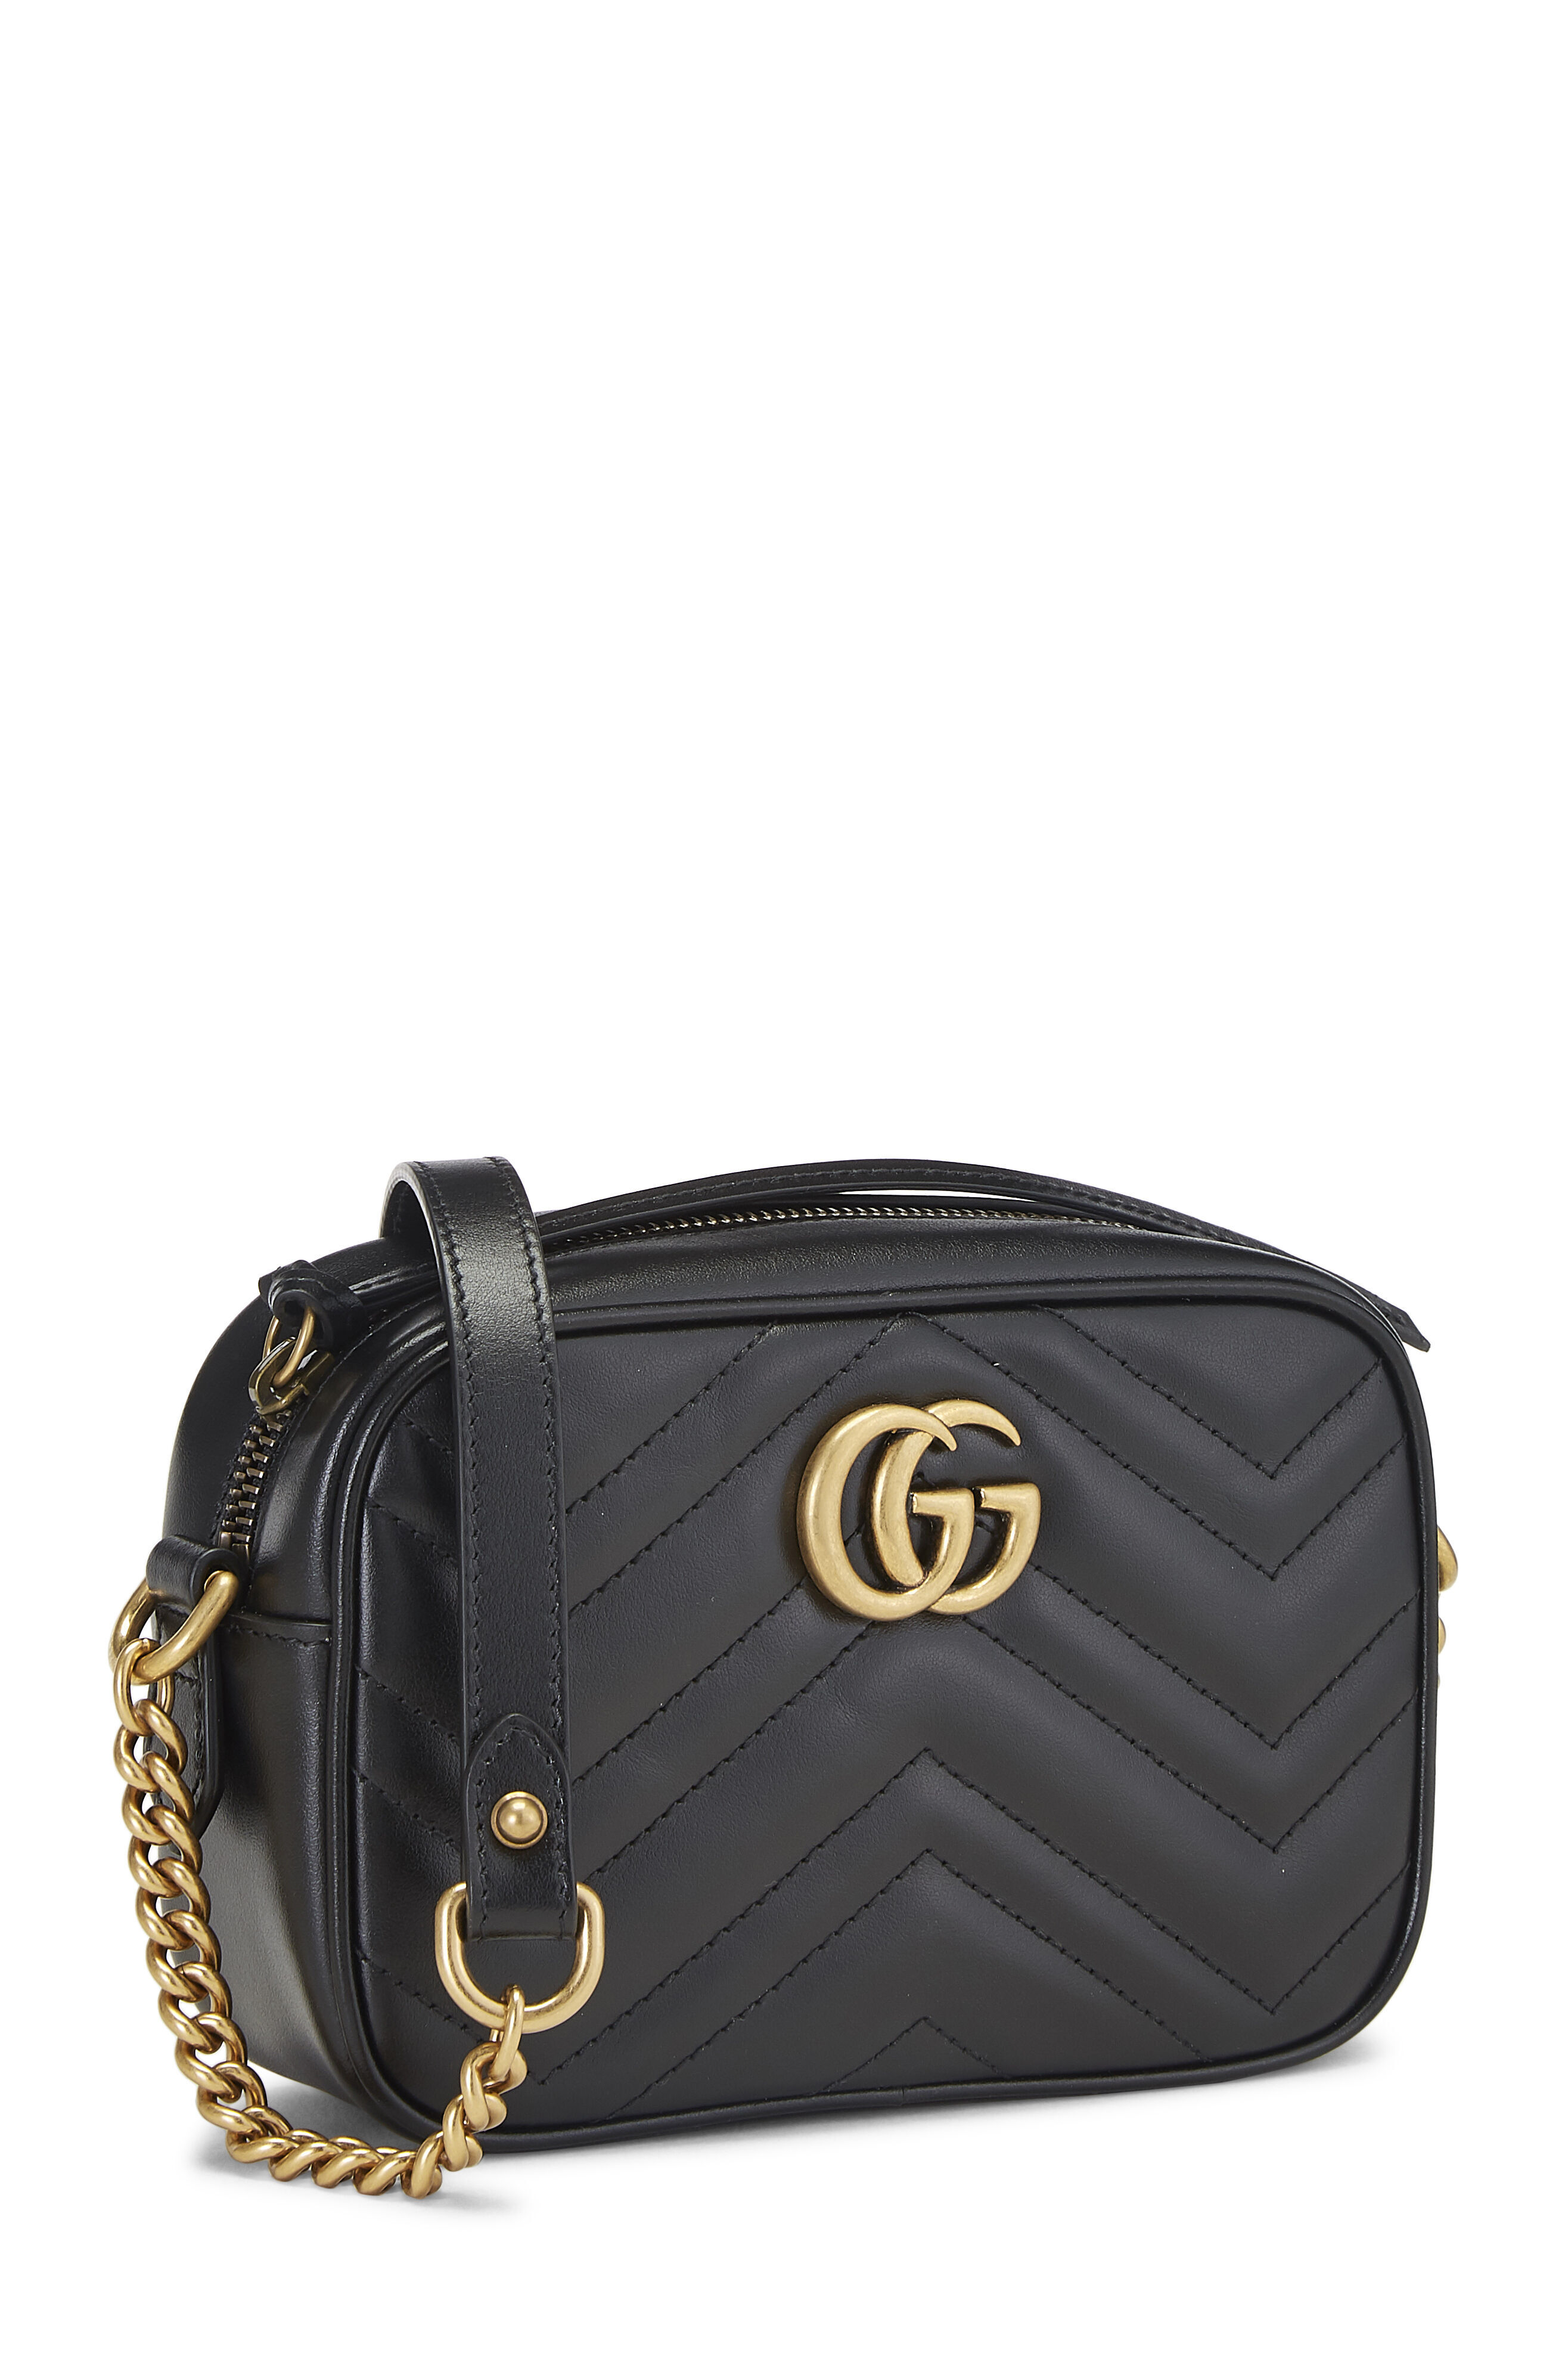 Jumbo GG large tote bag in black leather | GUCCI® US